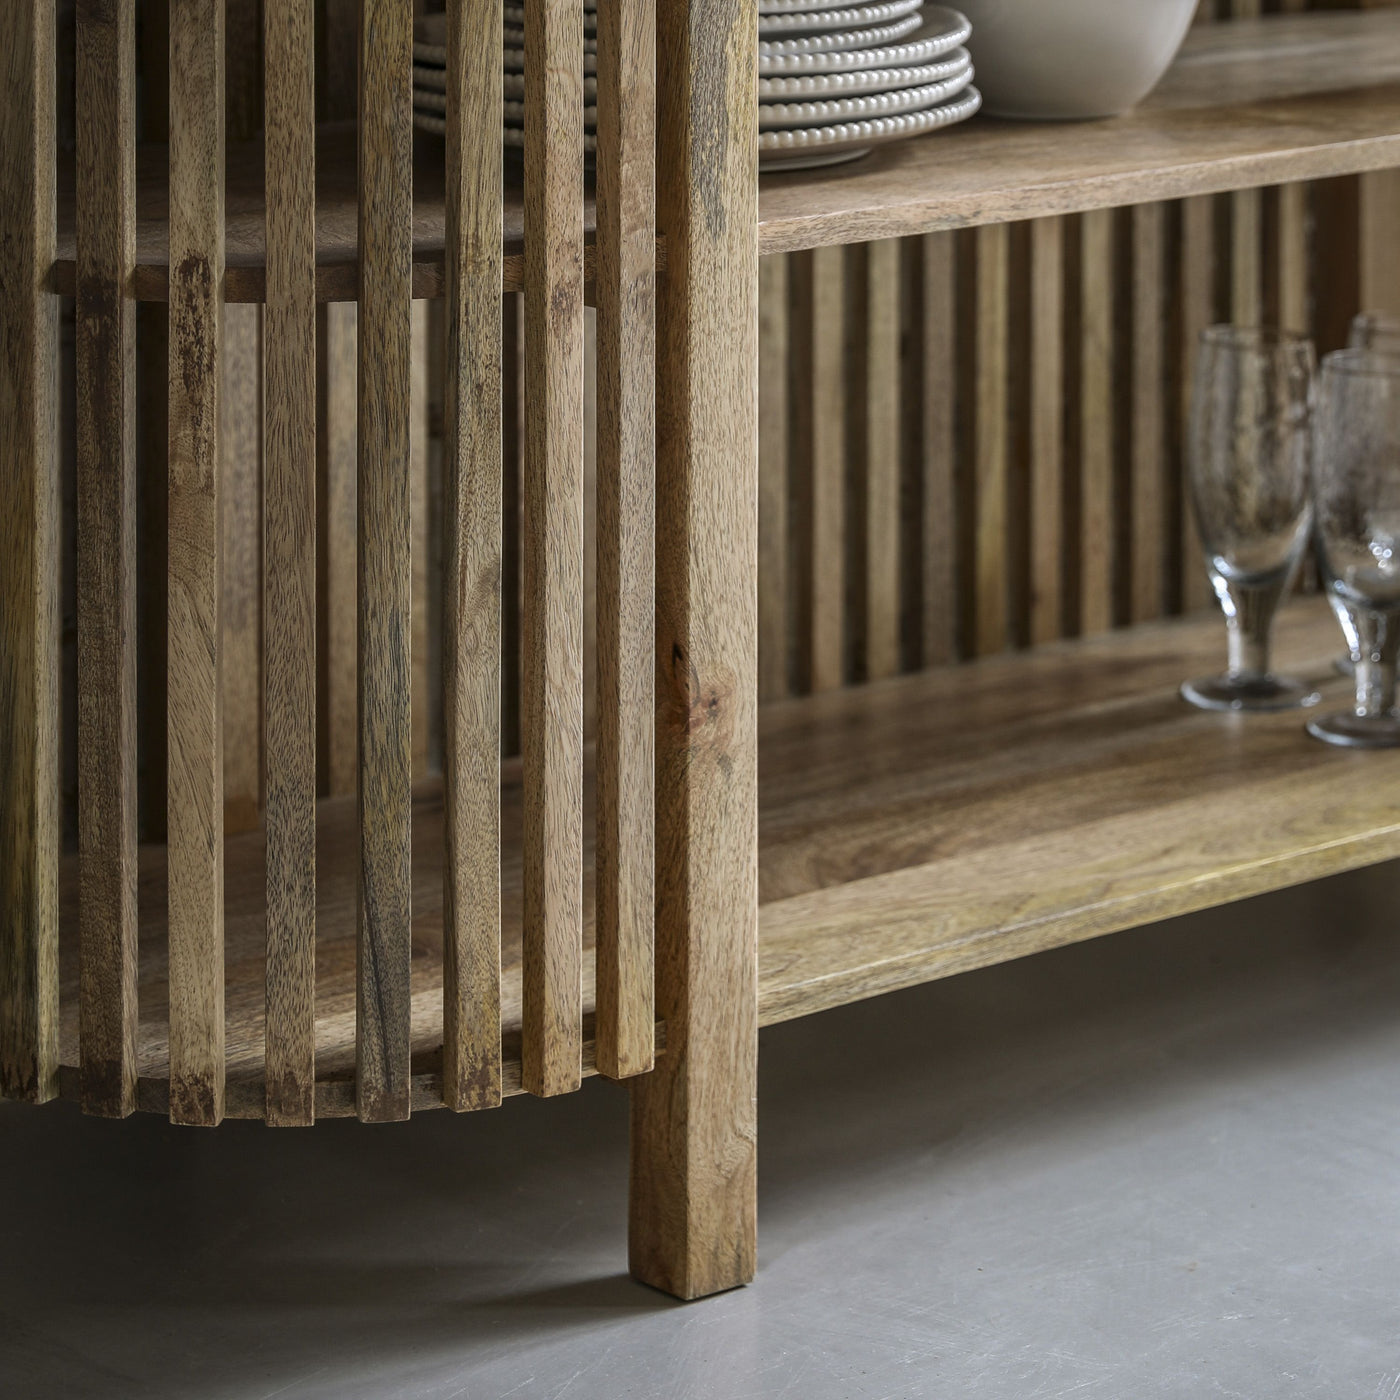 Herodsfoot Slatted Console Table 1400x400x700mm